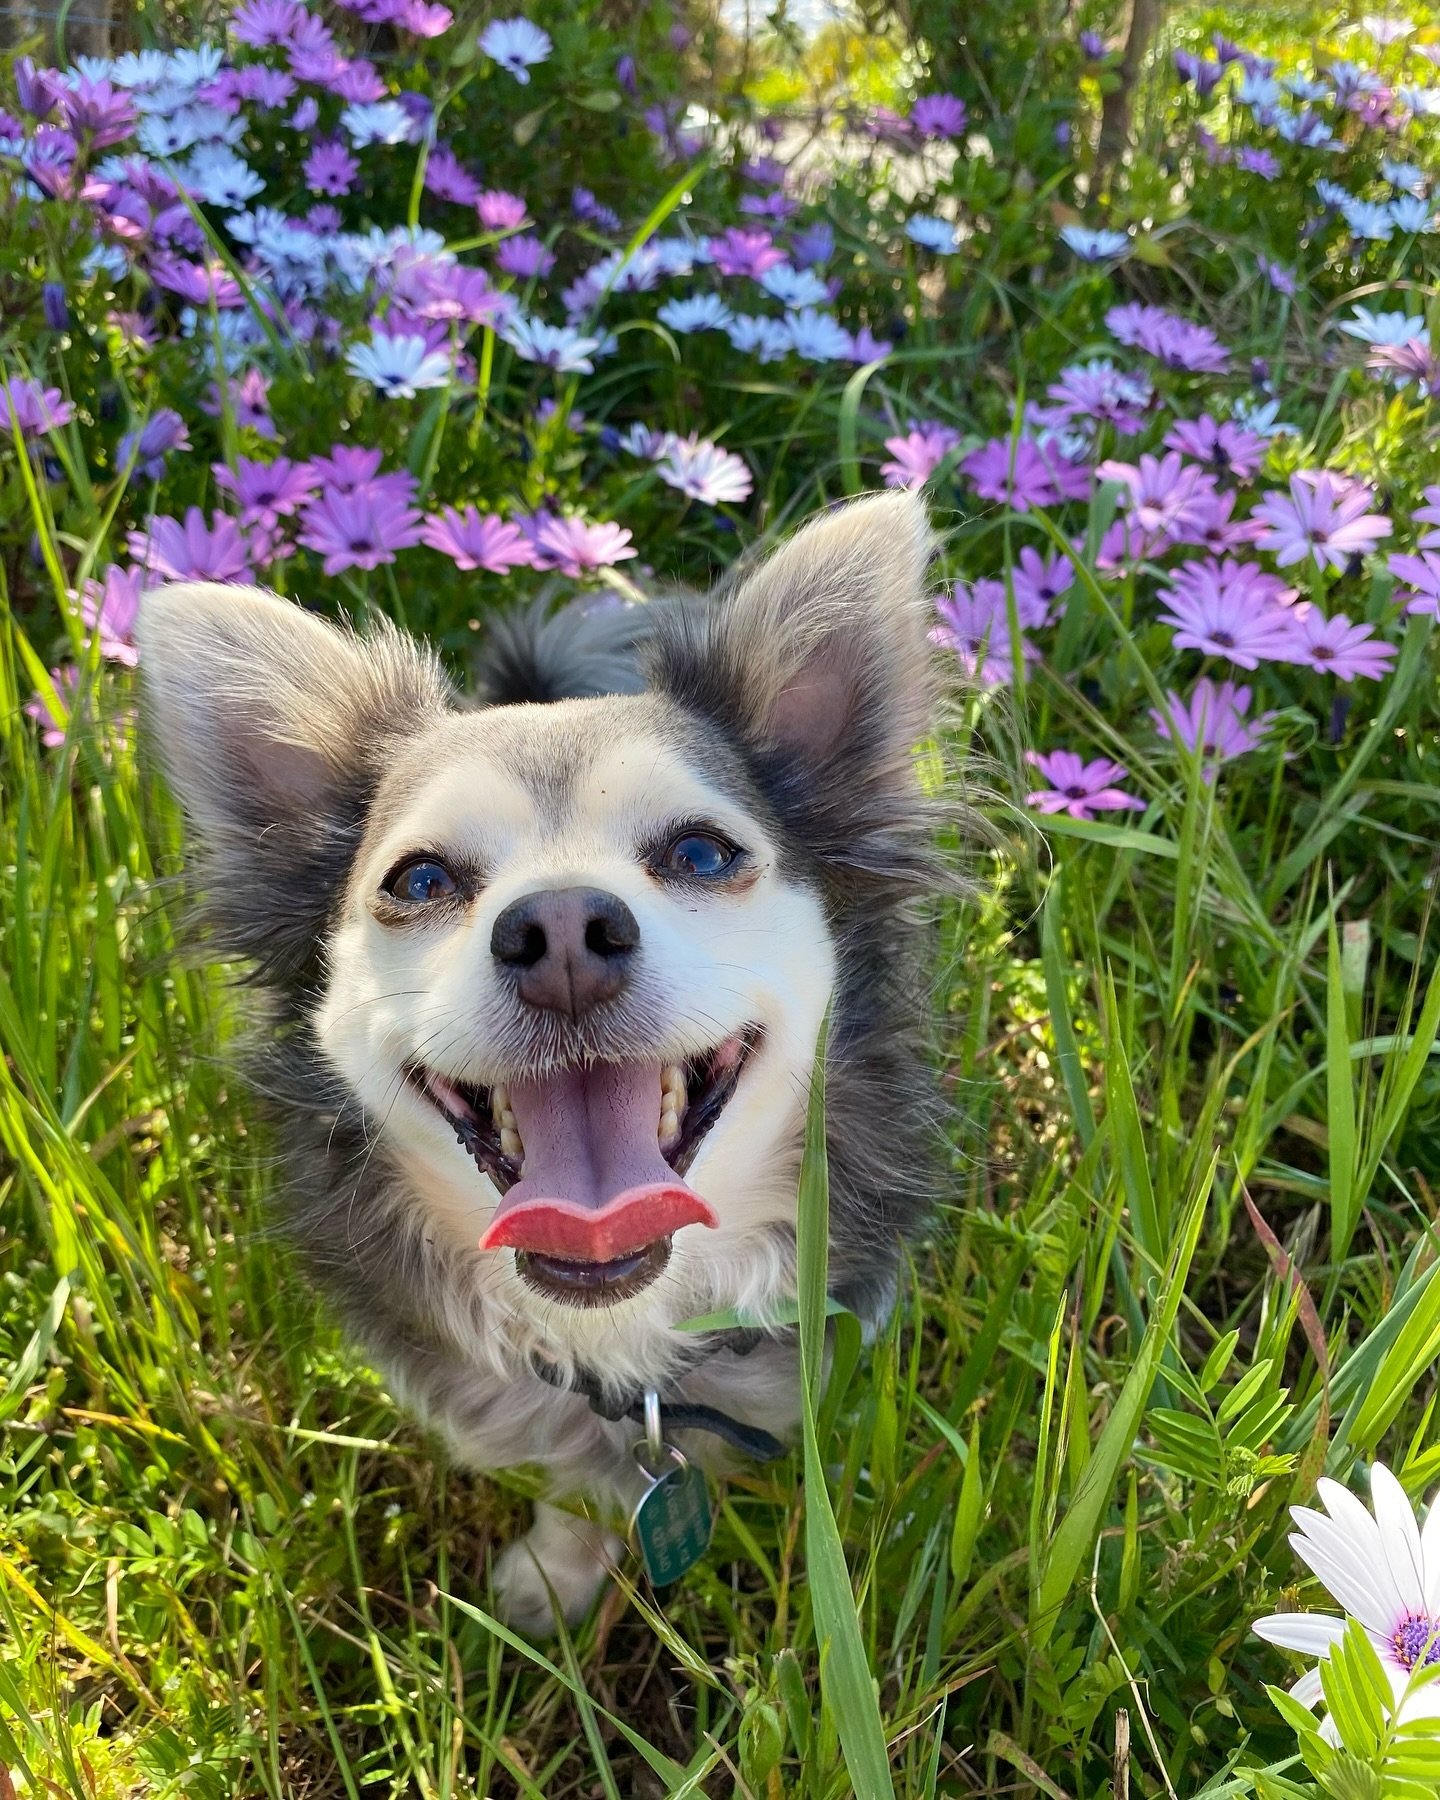 🌸 Daisy&rsquo;s advice - always stop to smell the flowers! 

#christchurchdogs #christchurchpets #dogsofchristchurch #christchurchdogwalking